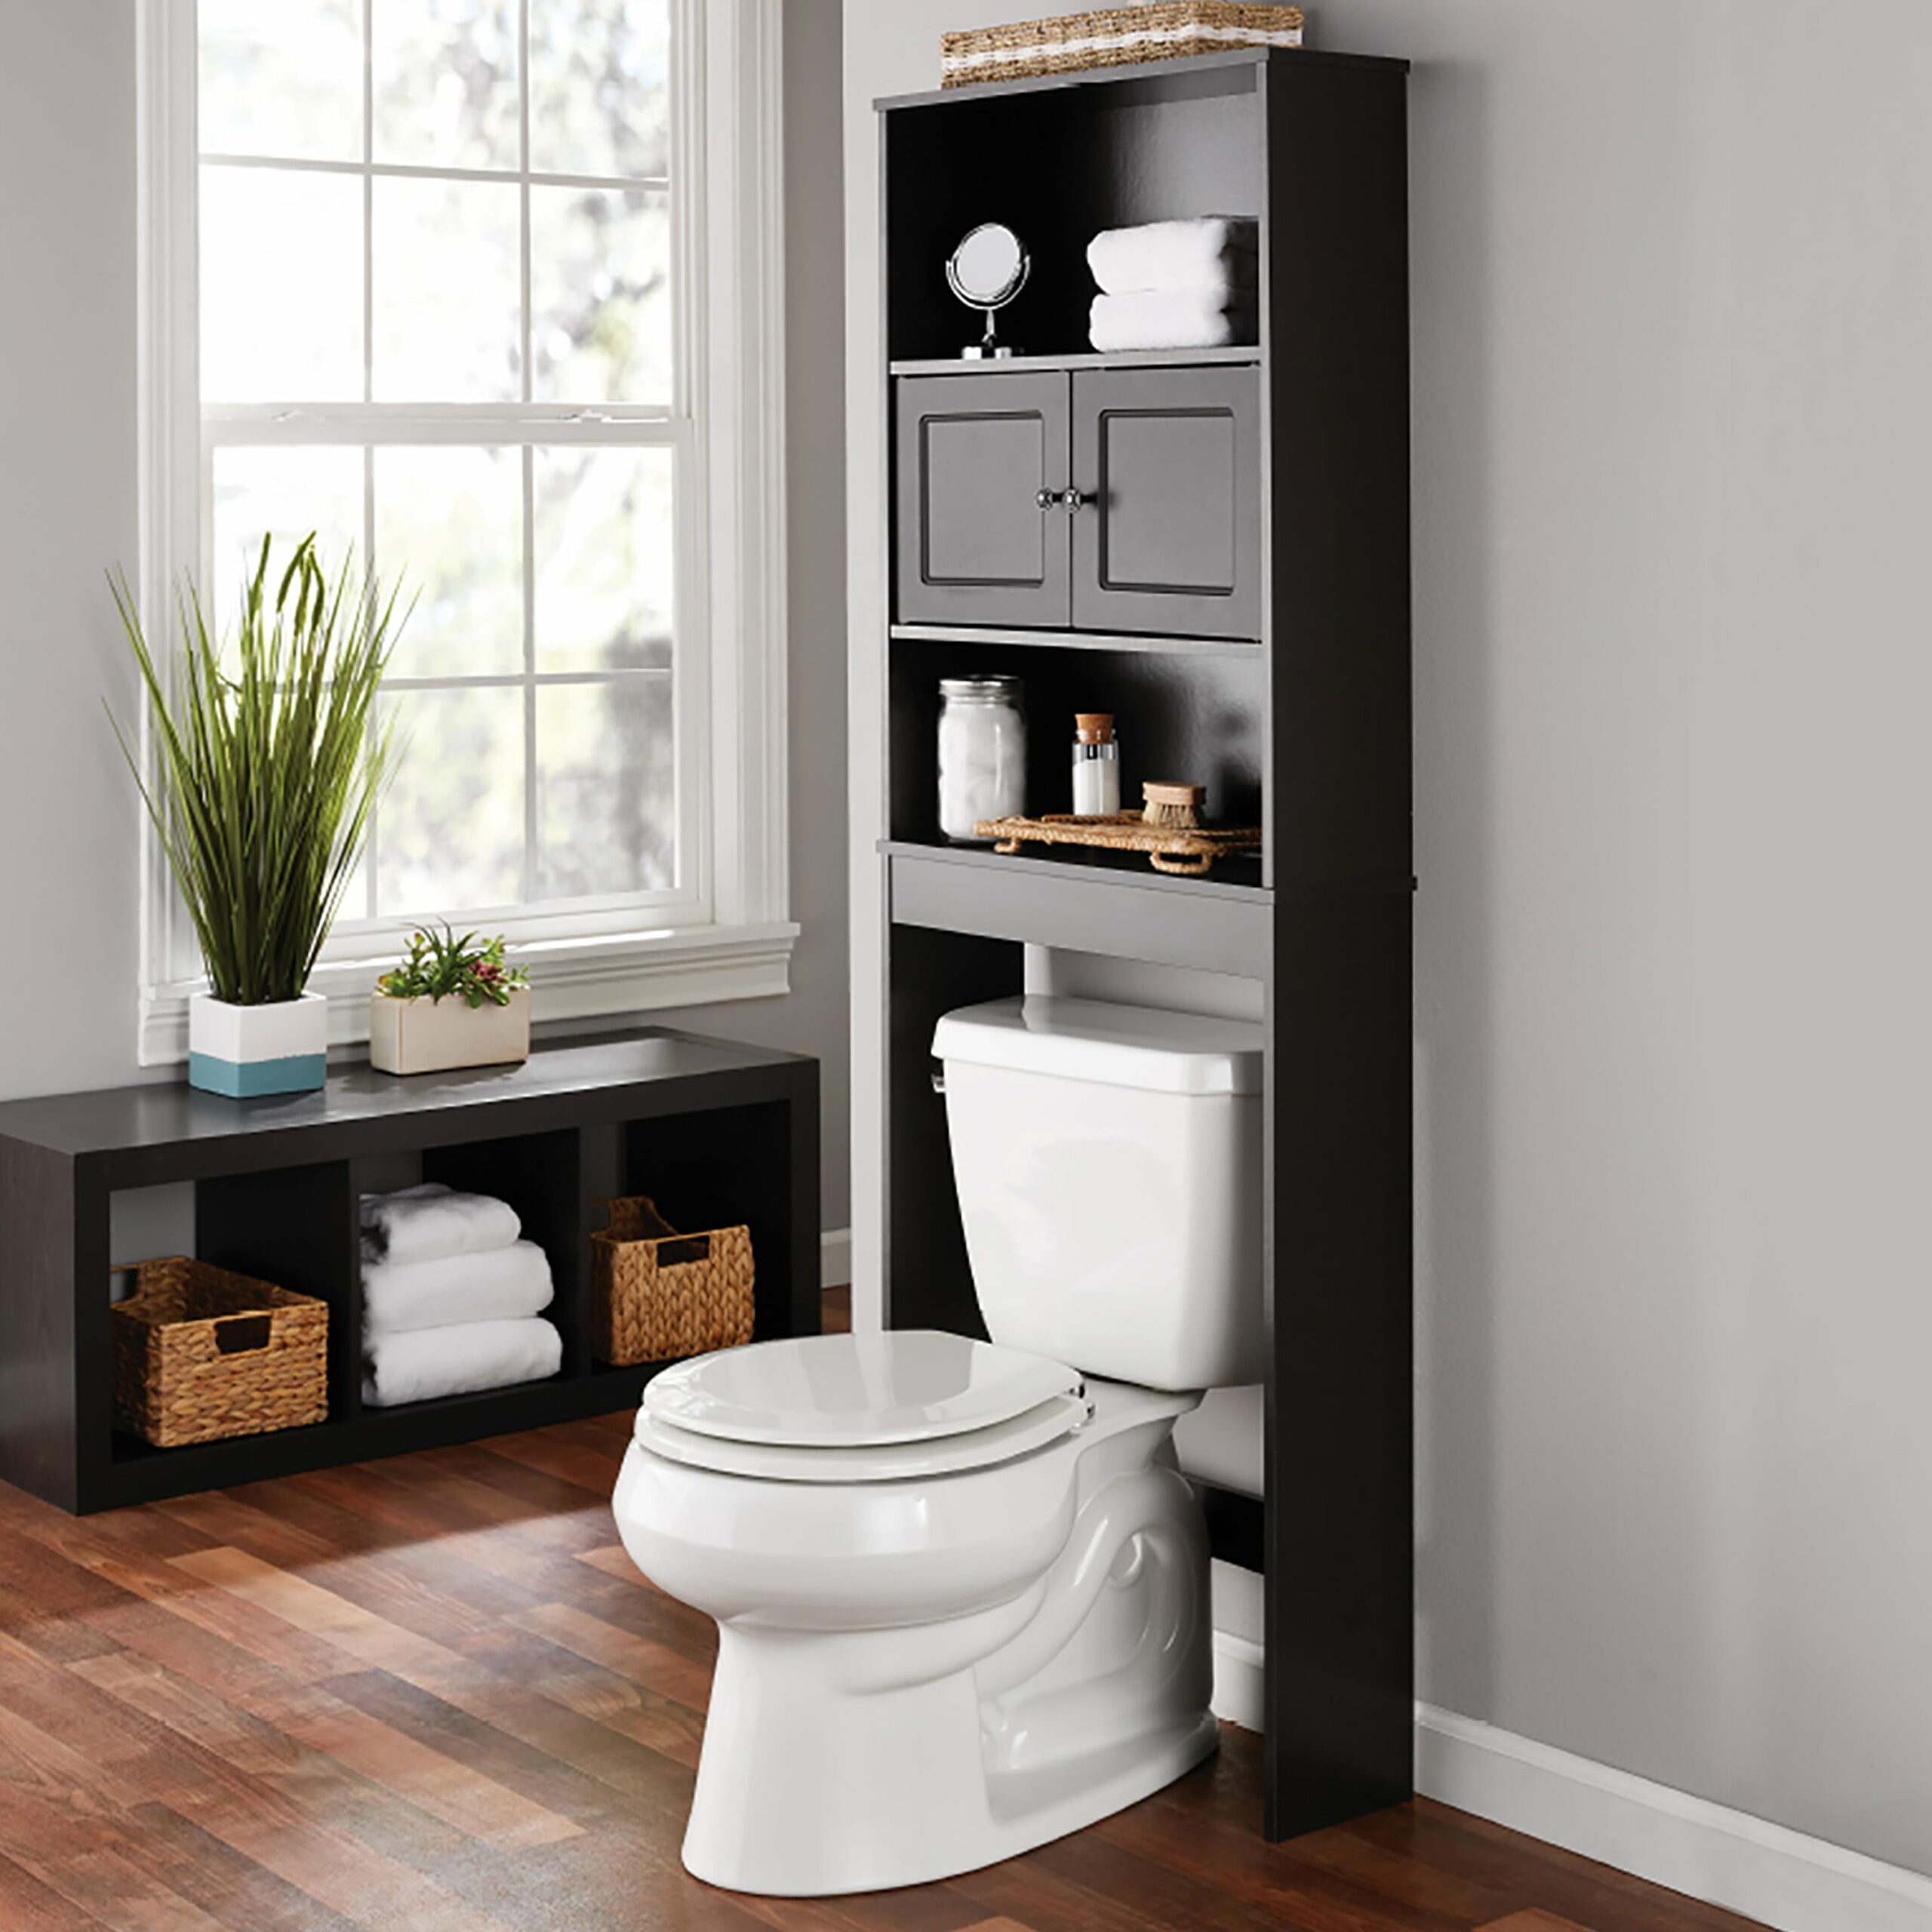 walmart over the toilet storage instructions Toilet saver mainstays